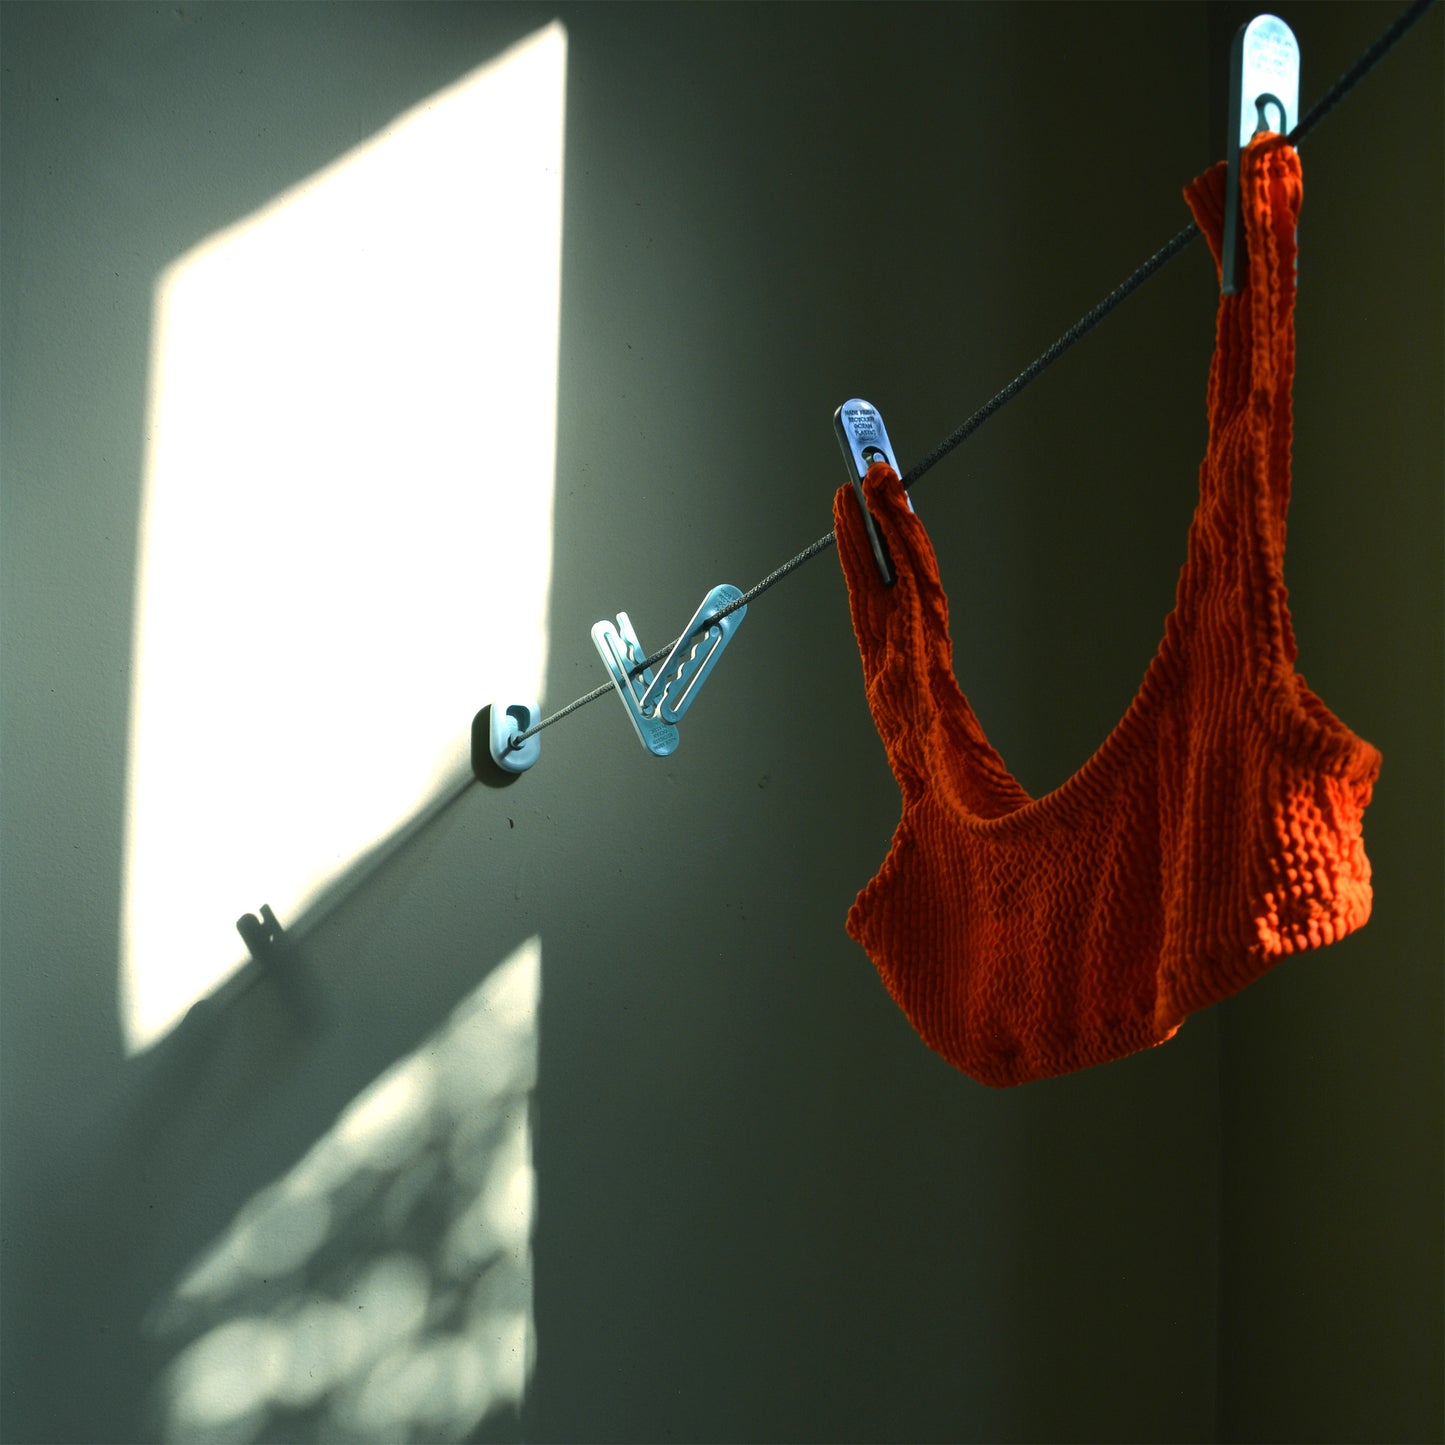 An orange swim top hangs from the LOOP clothesline held up by green NONA clothespins in the afternoon light